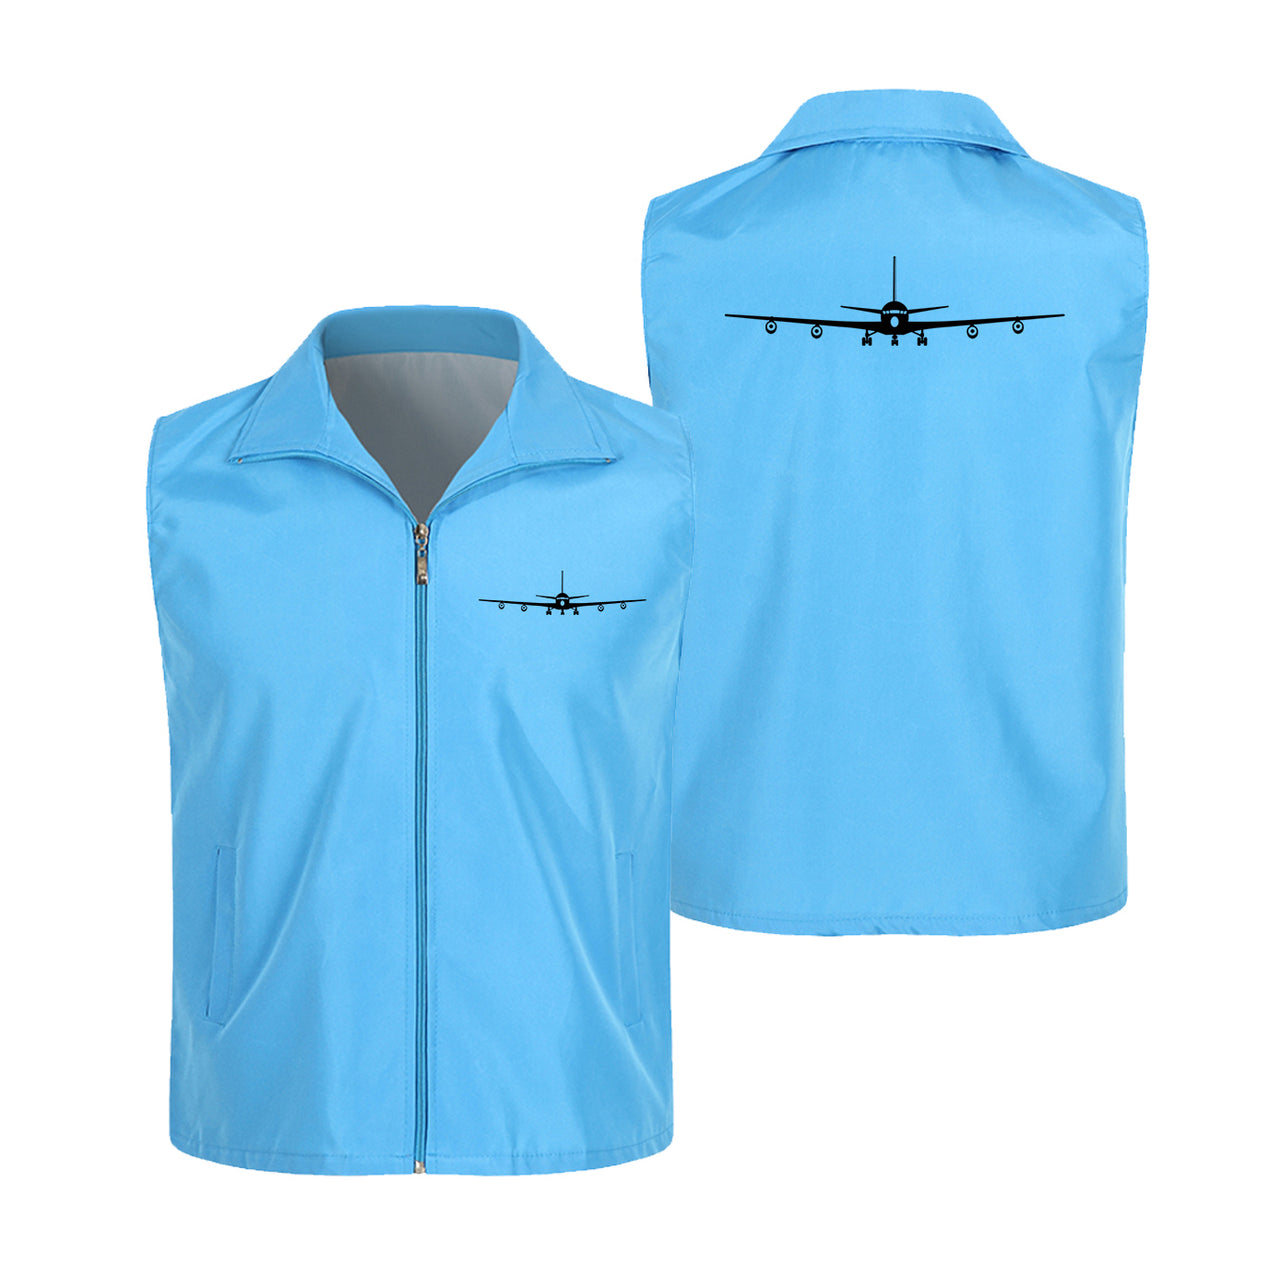 Boeing 707 Silhouette Designed Thin Style Vests